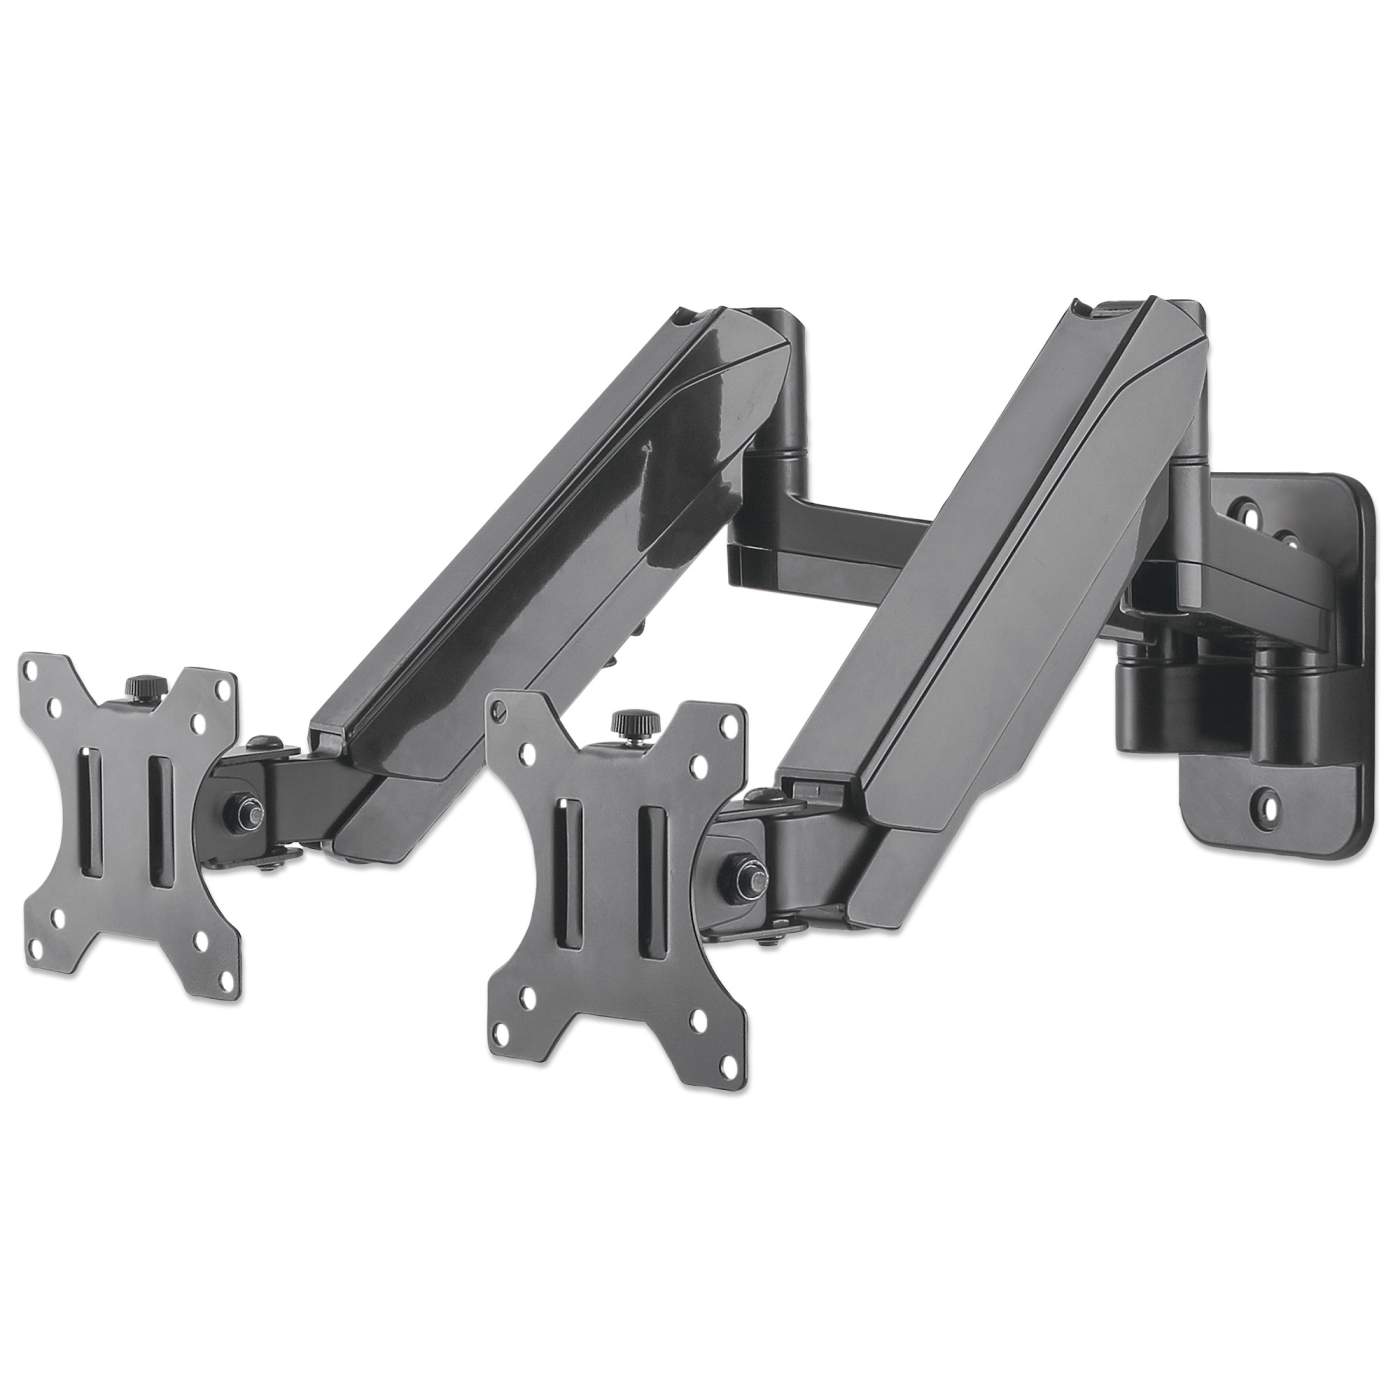 Universal Dual Monitor St& w/ Double-Link Swing Arms (461559)